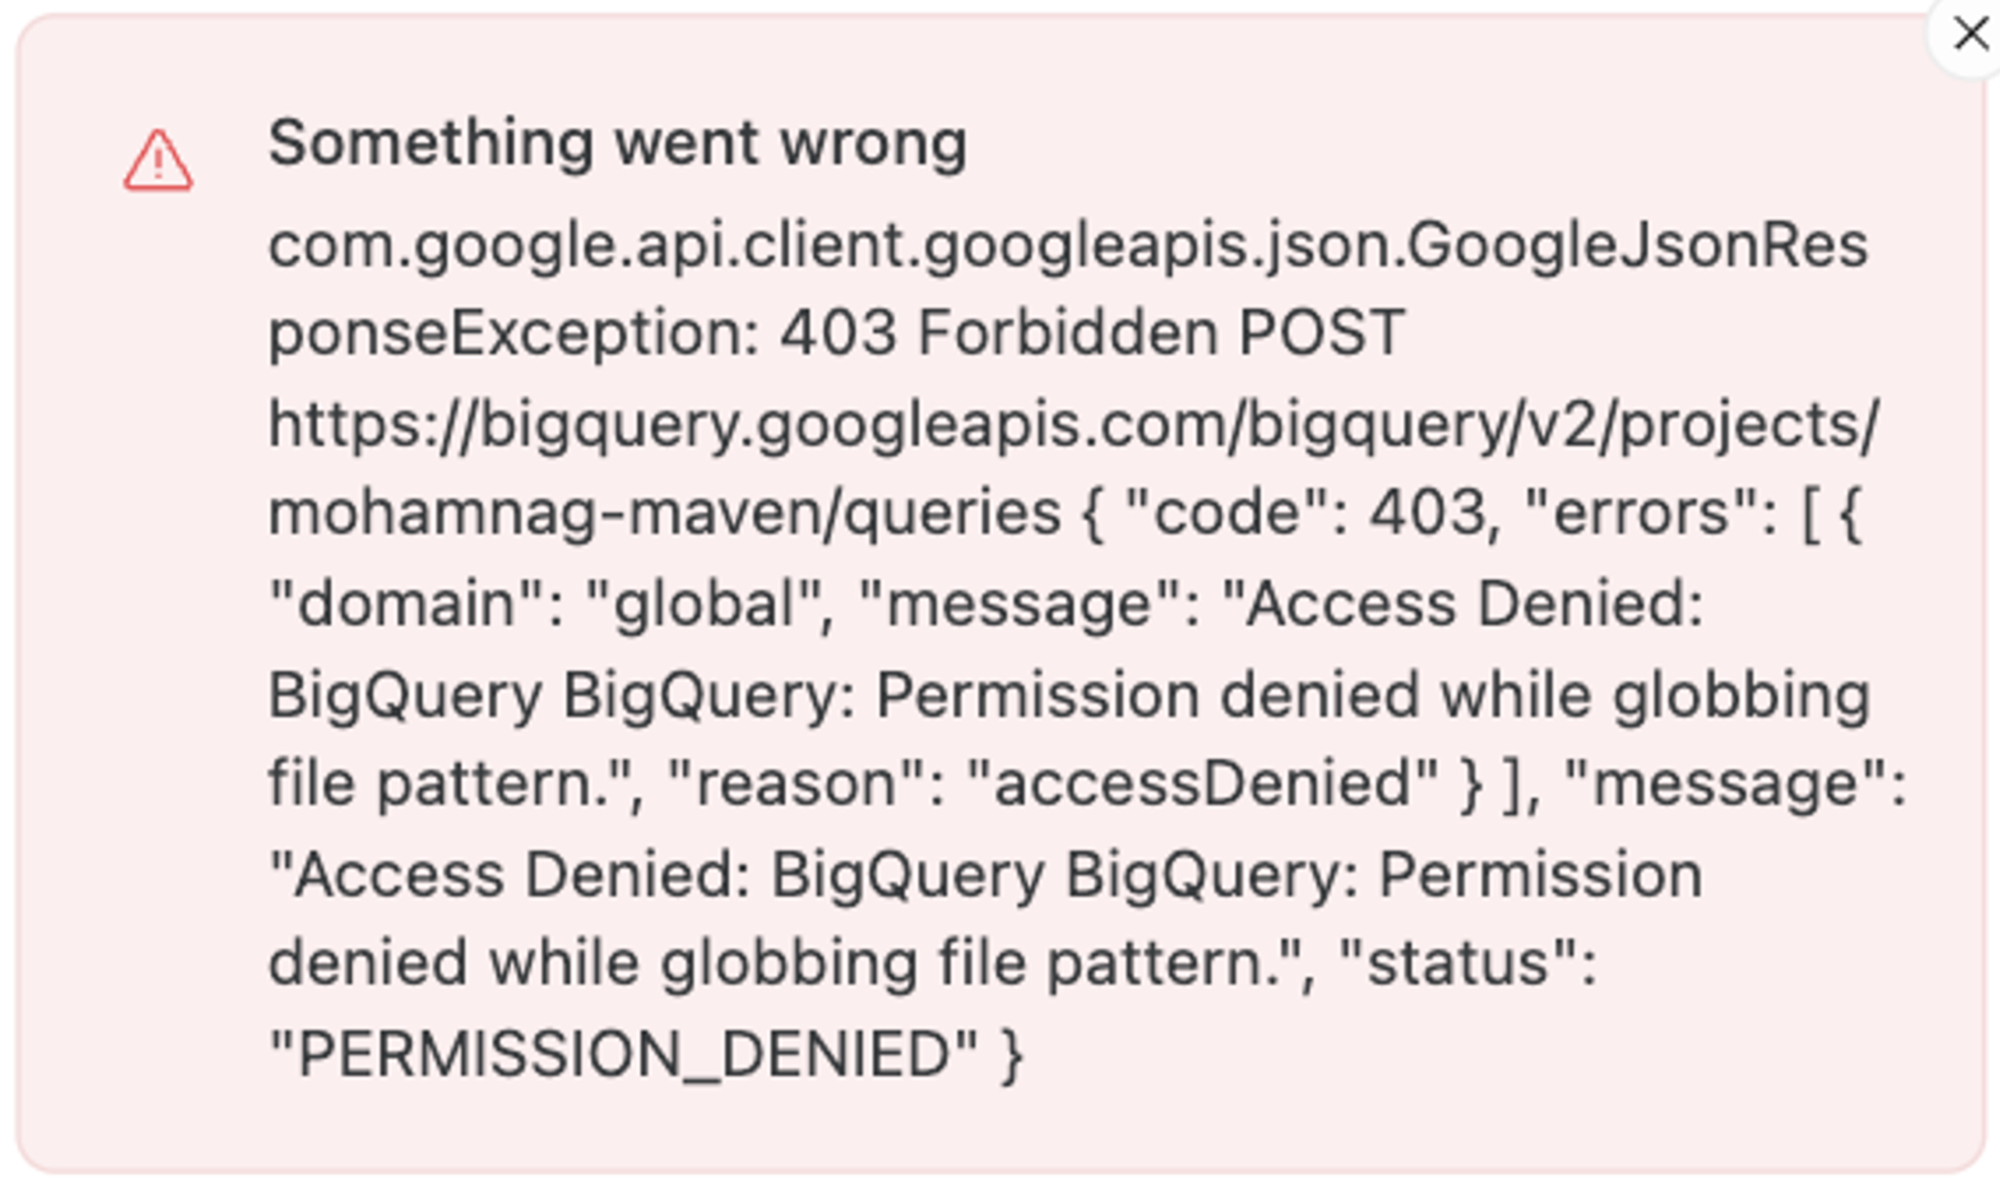 Important part of error in text: "Access Denied:
BigQuery BigQuery: Permission denied while globbing file pattern.",